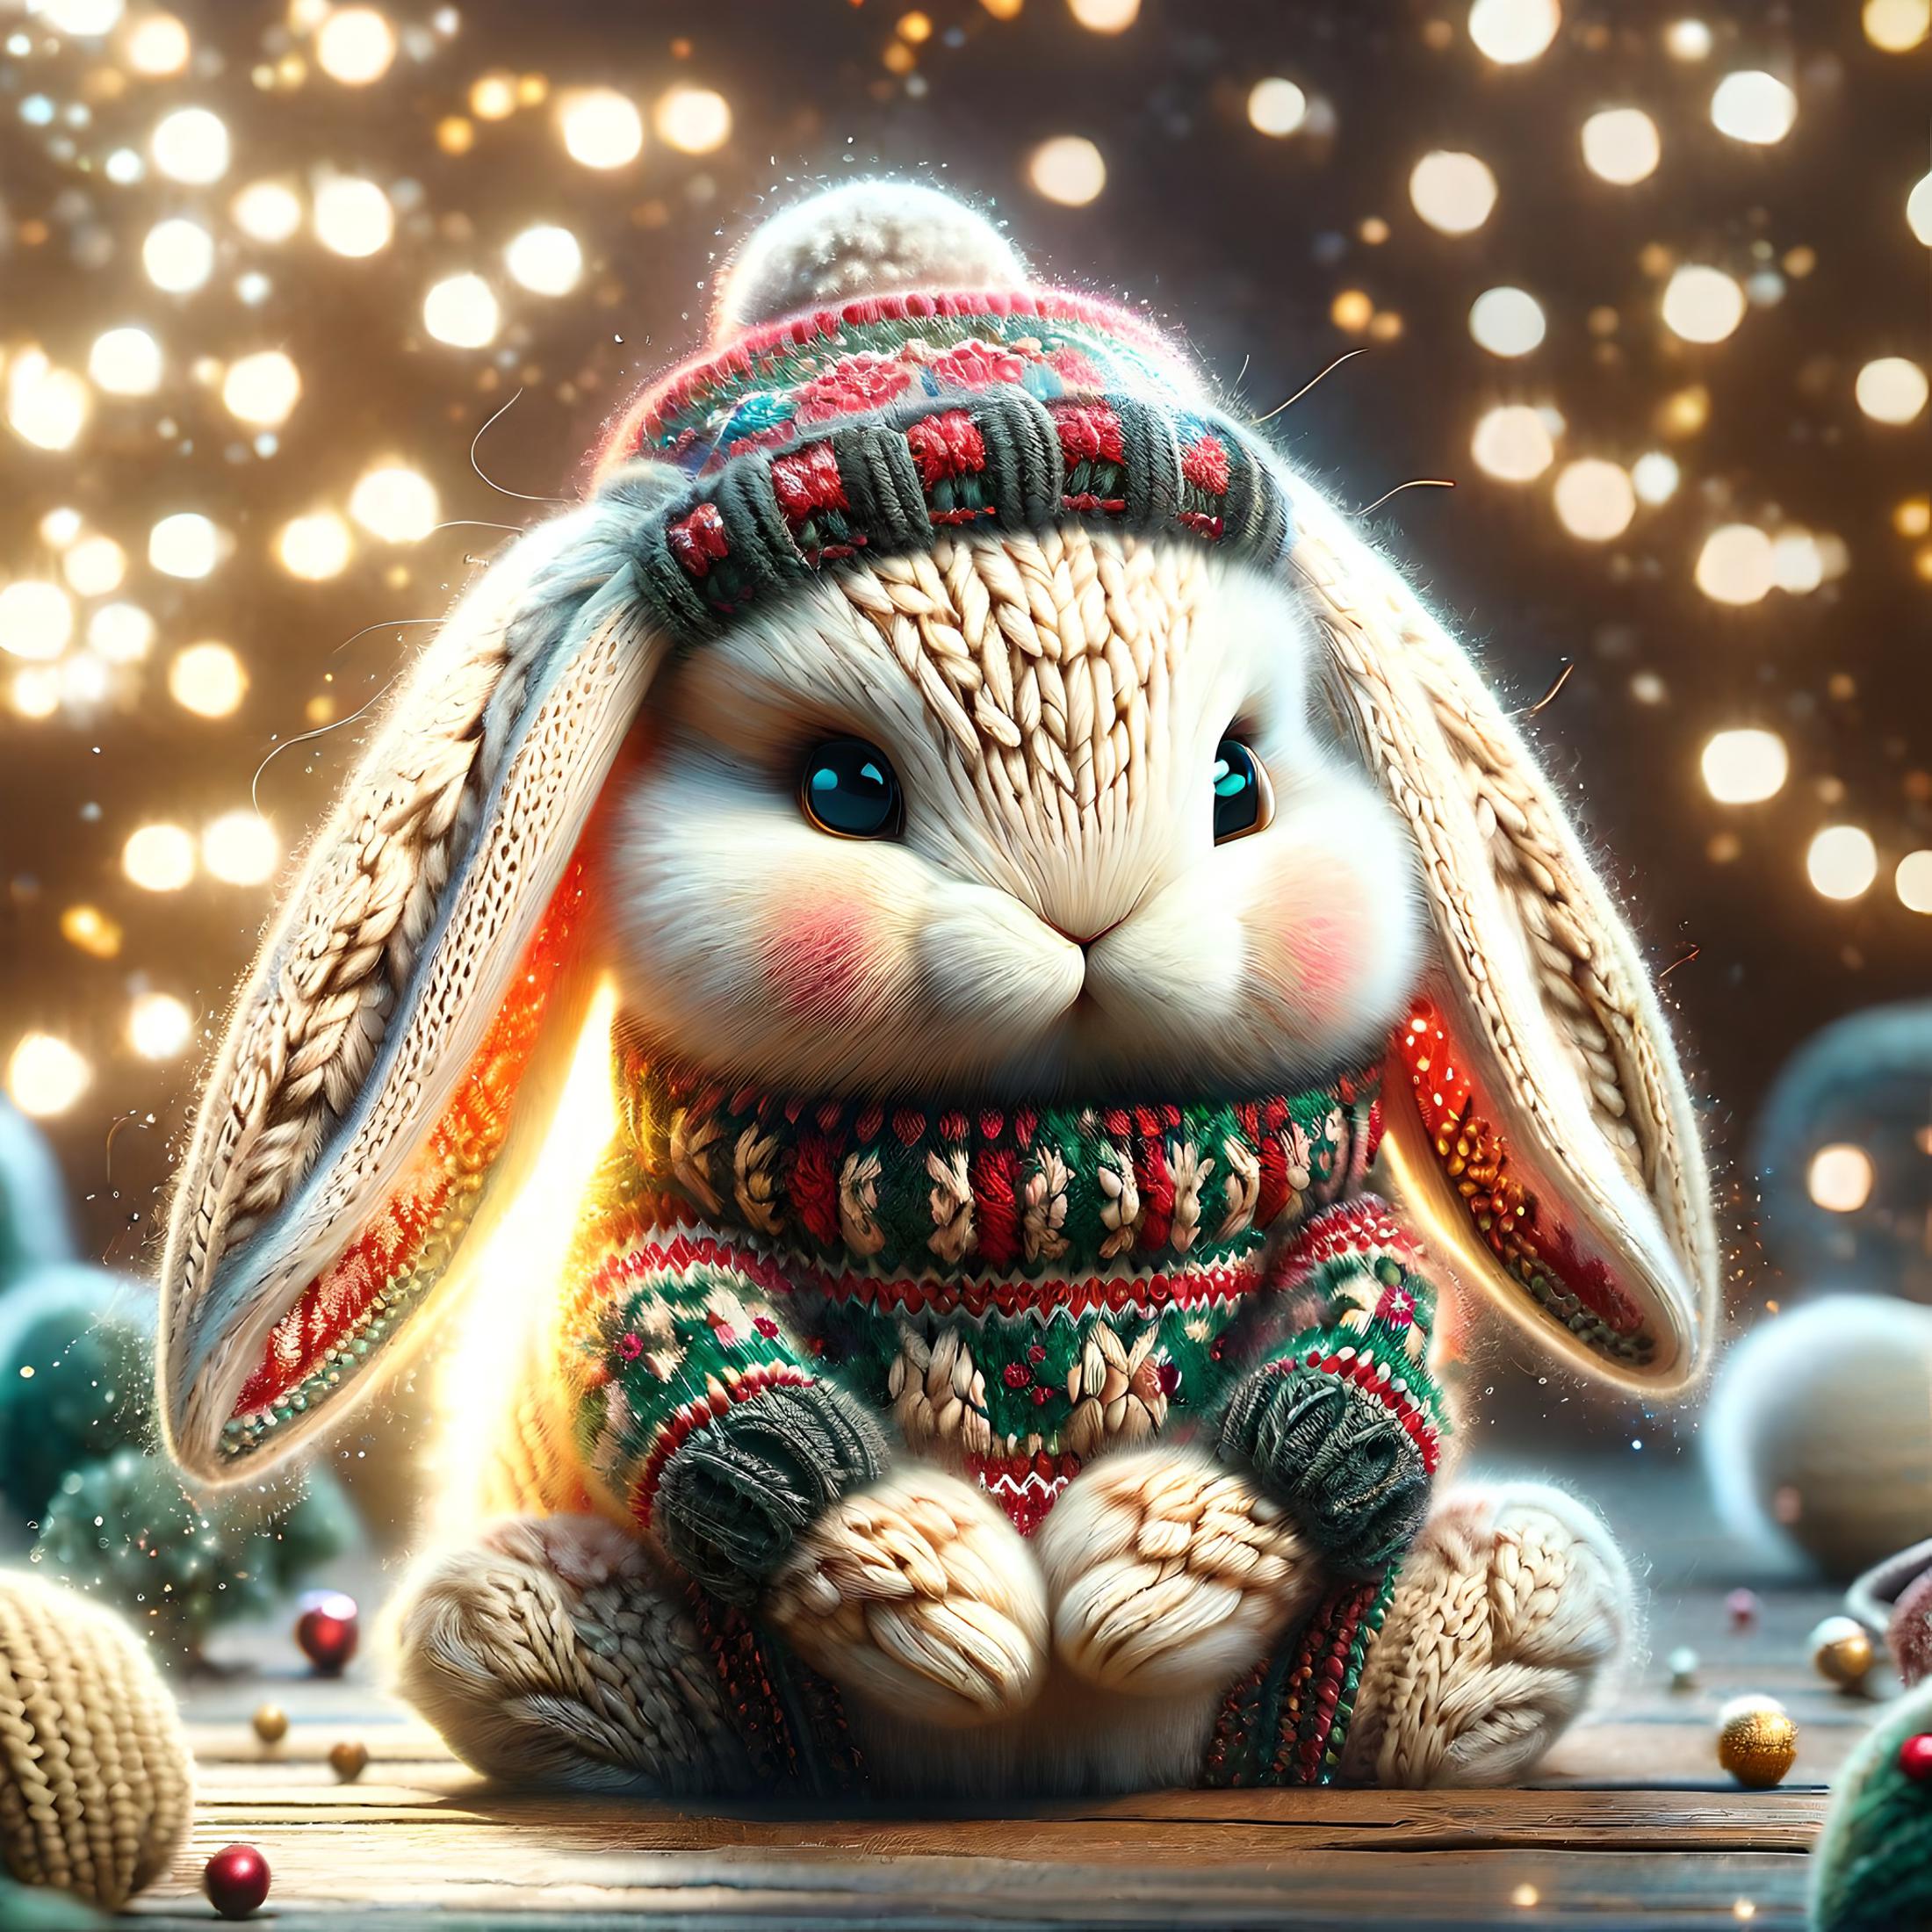 A cute bunny wearing a sweater and a hat, sitting on a table with ornaments.